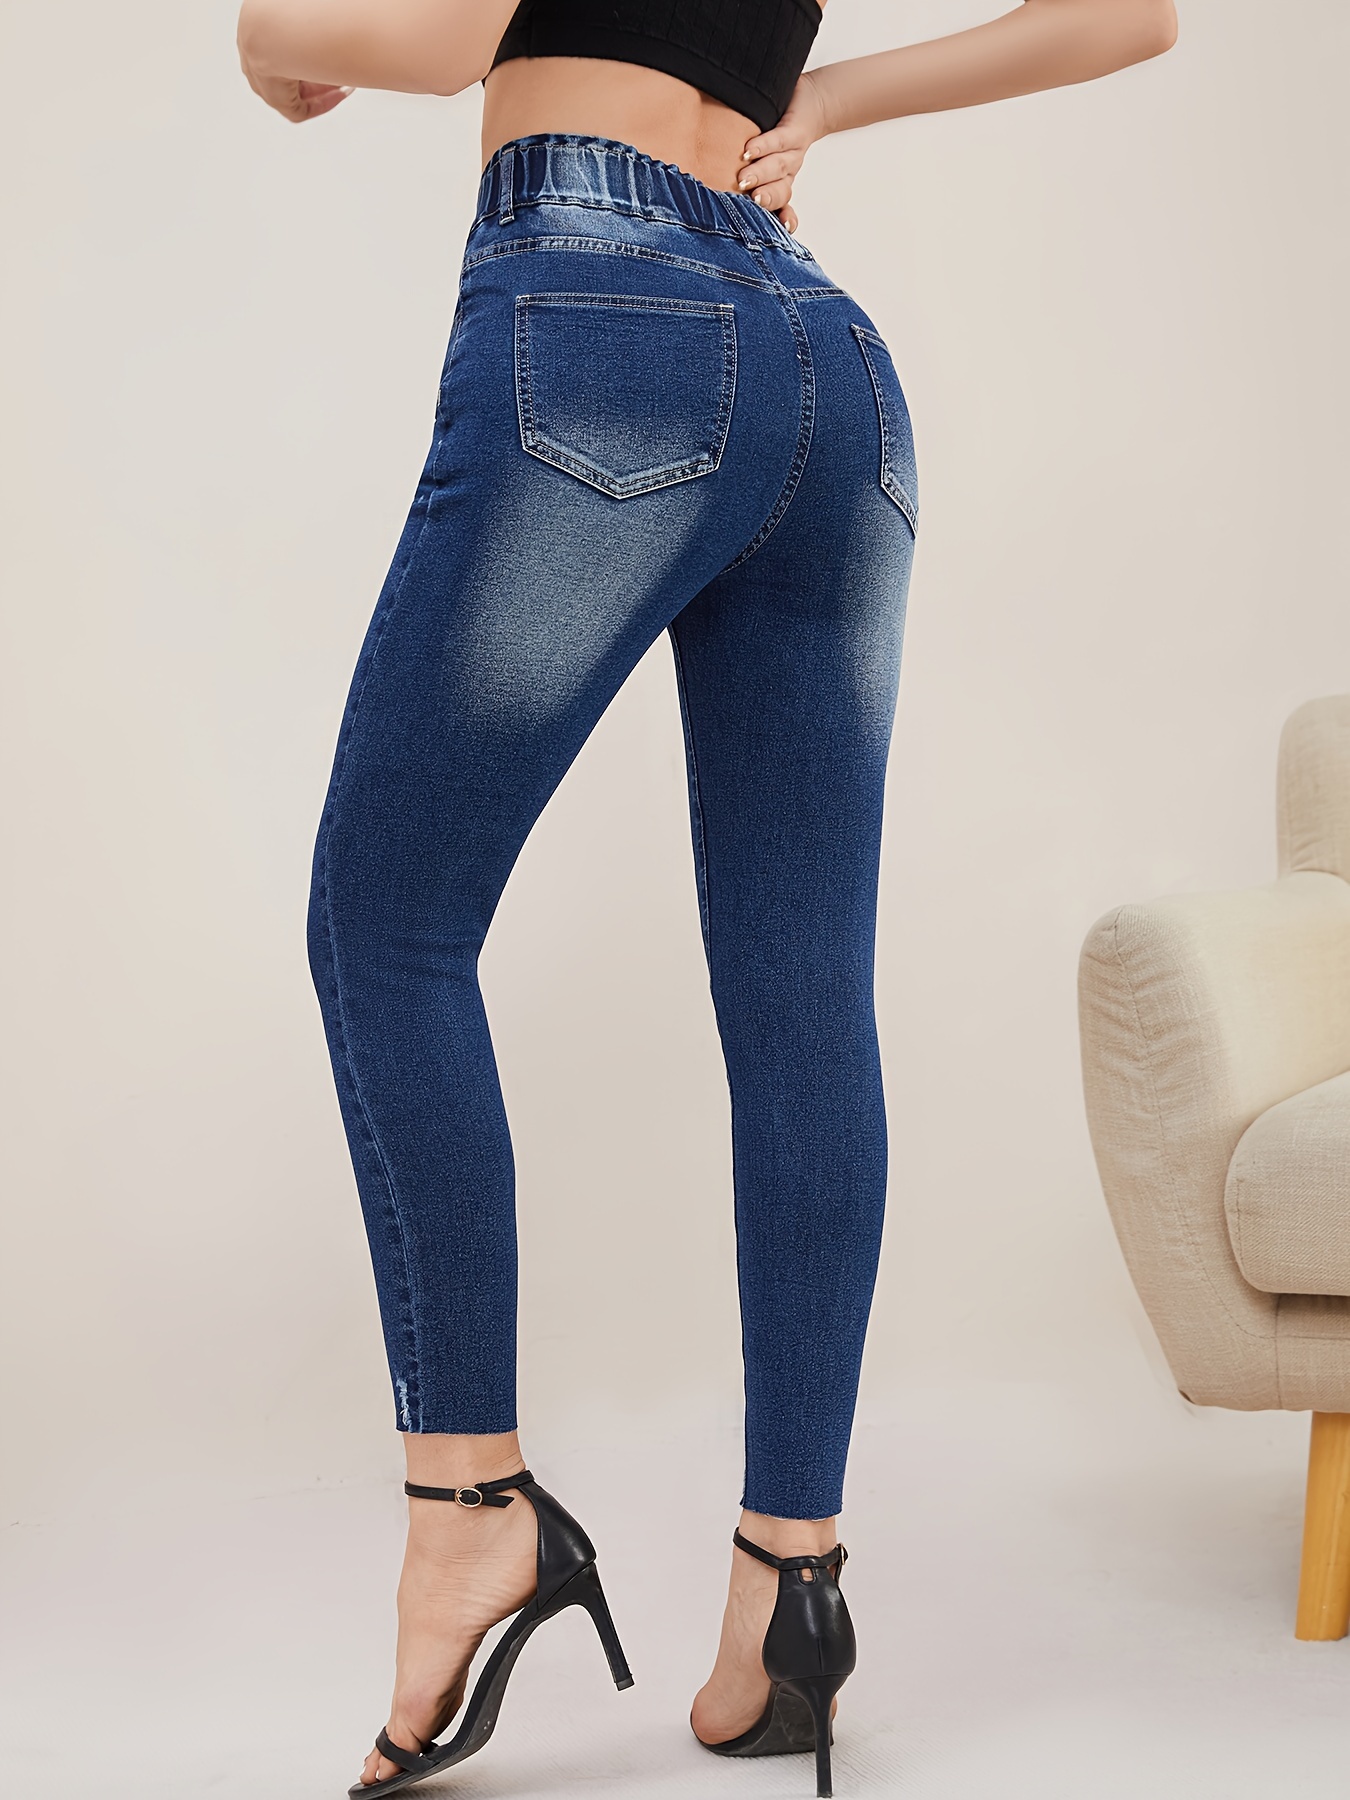 double buttons elastic waist skinny jeans high stretch fashion fitted denim pants with pocket womens denim jeans clothing